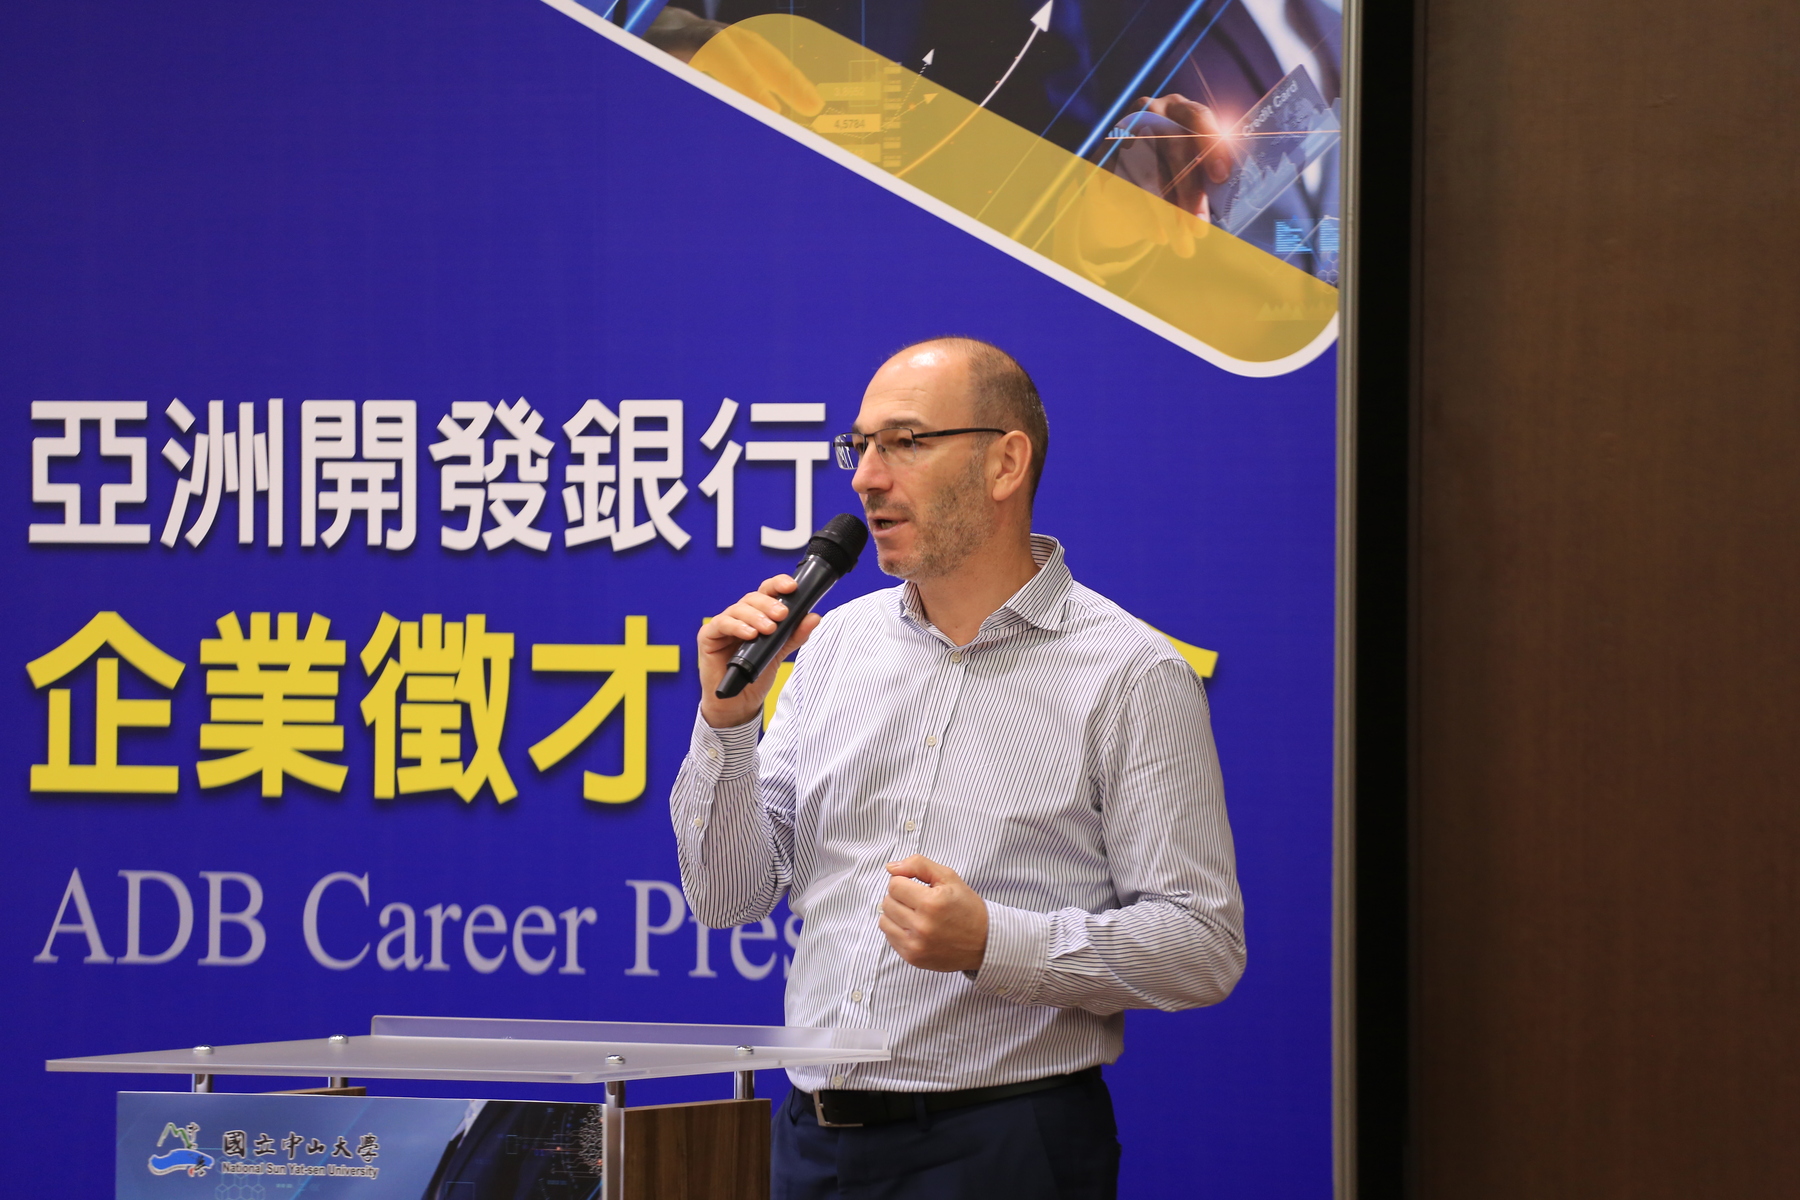 Pierre Dyens, ADB’s principal human resources specialist, presented the available job positions.